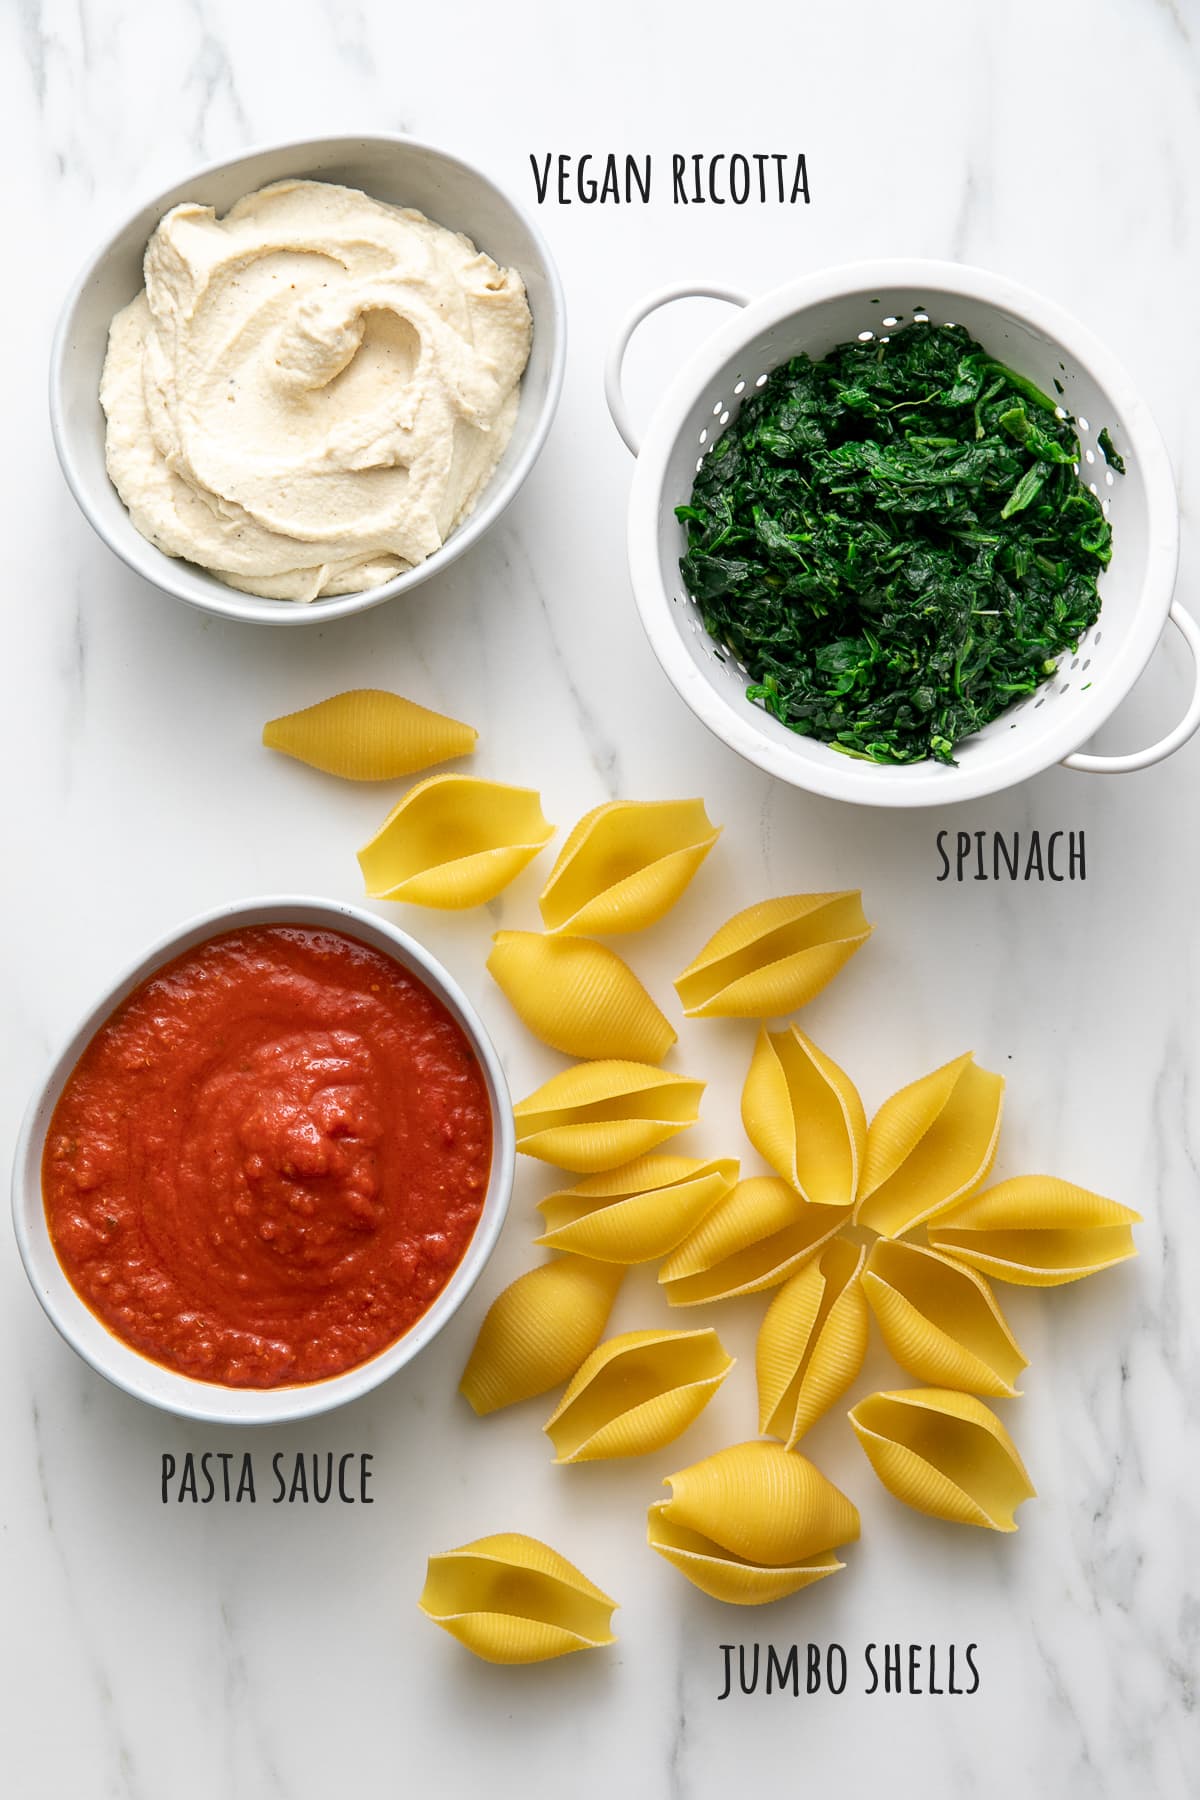 top down view of ingredients used to make ricotta and spinach vegan stuffed shells recipe.